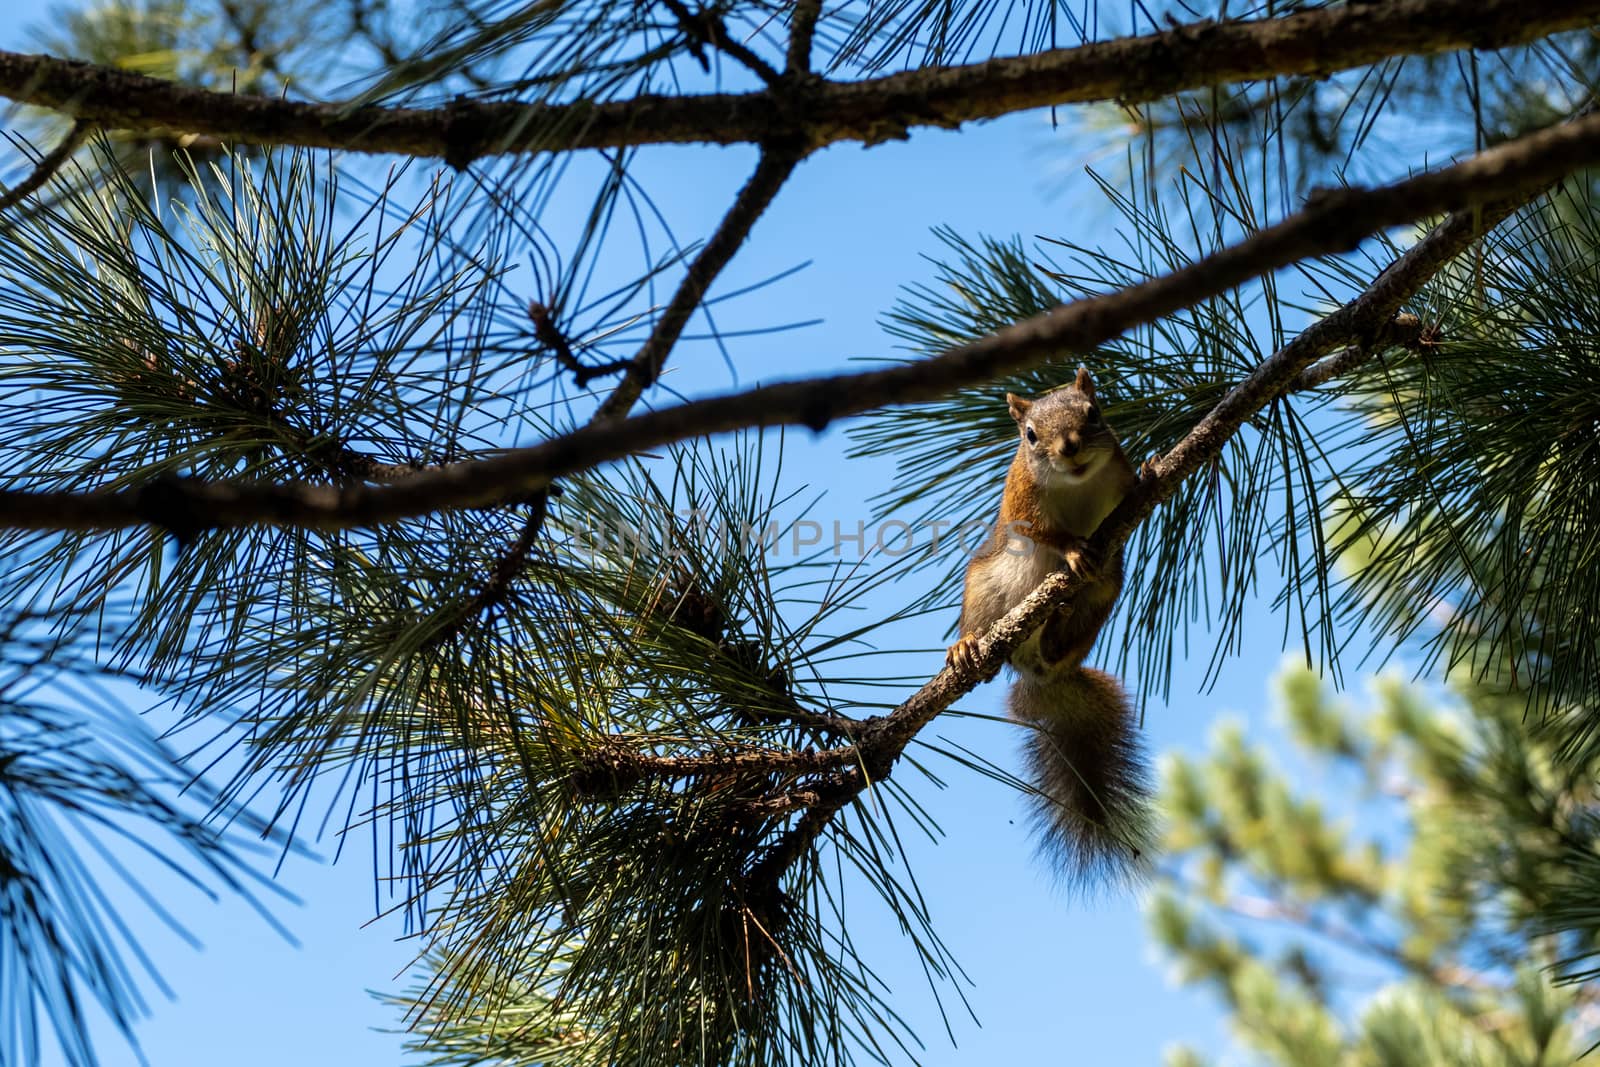 An American red squirrel (Tamiasciurus hudsonicus) clings to a thin branch on a pine tree in the forest.